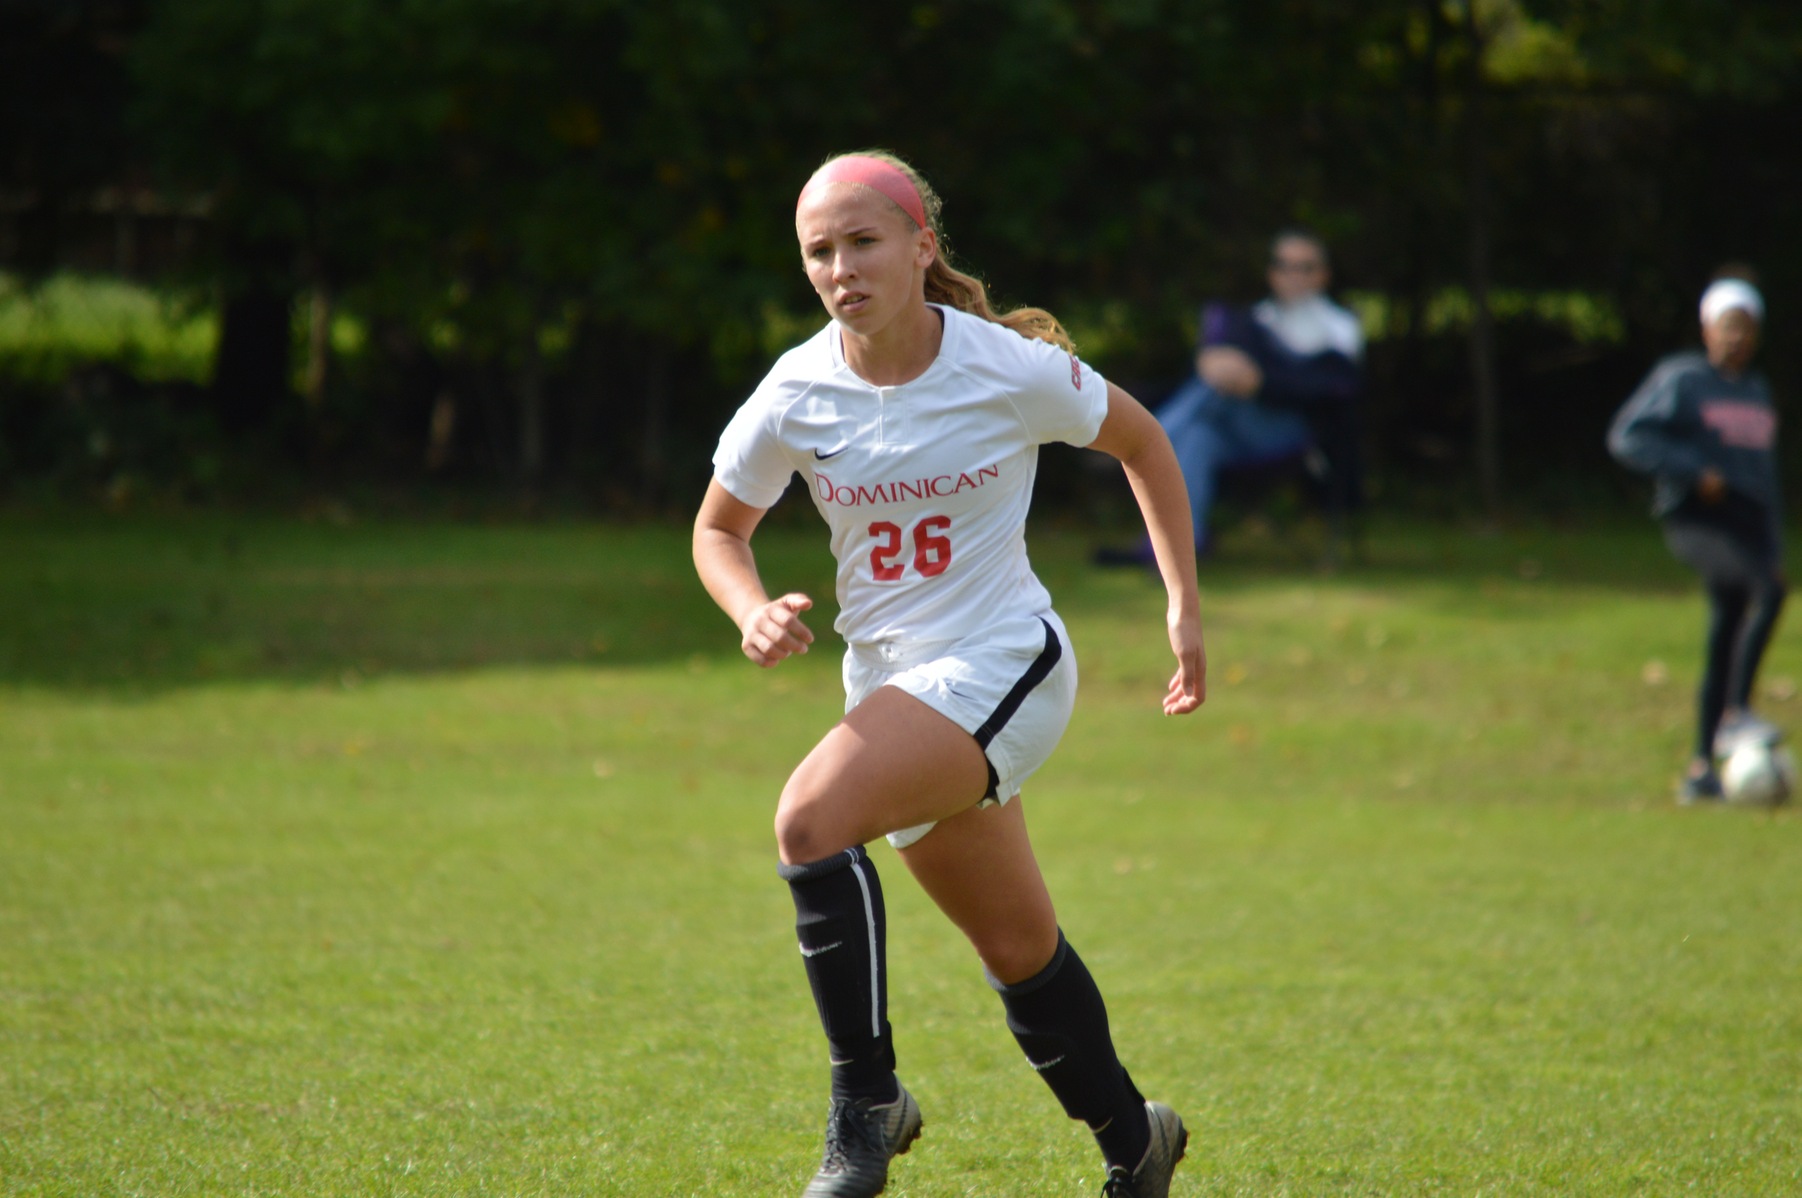 GEARY NAMED CACC ROOKIE OF THE WEEK